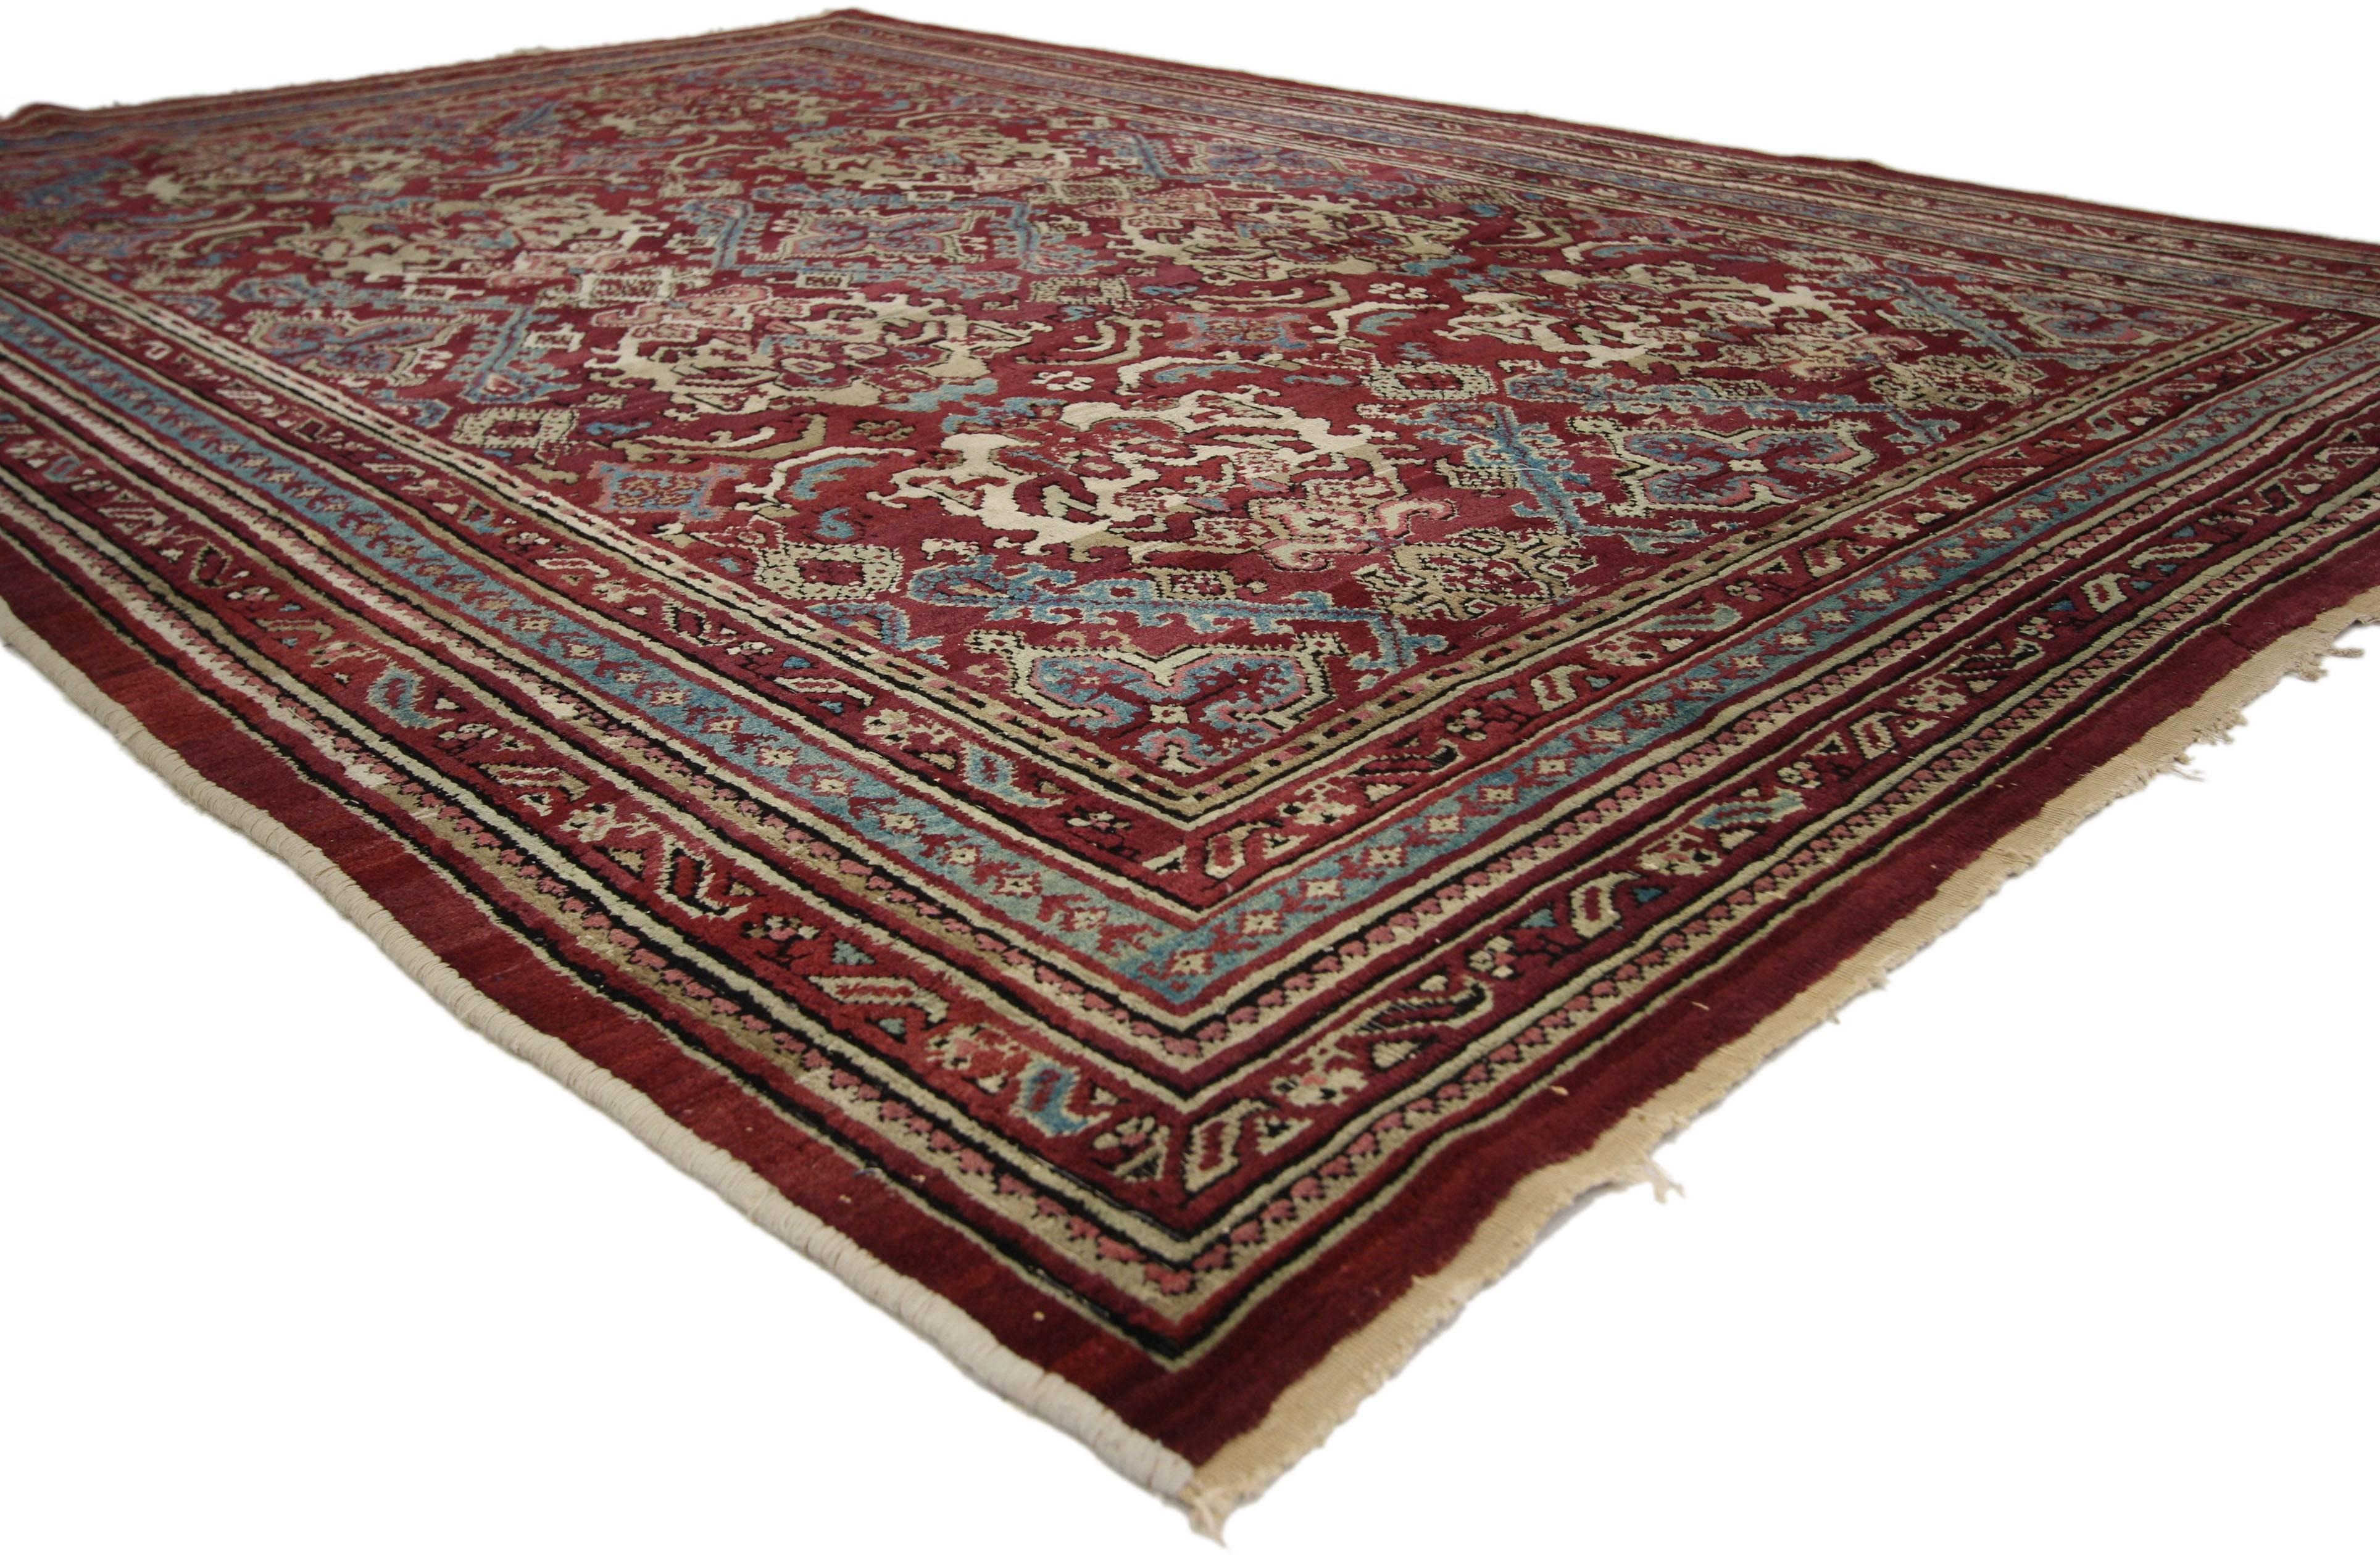 74672 19th Century Antique Indian Agra Rug with Modern Design. This antique Agra was hand-knotted in India during the late 19th century. It features a traditional, yet elegant composition characterized by an all-over pattern unfolding a balanced